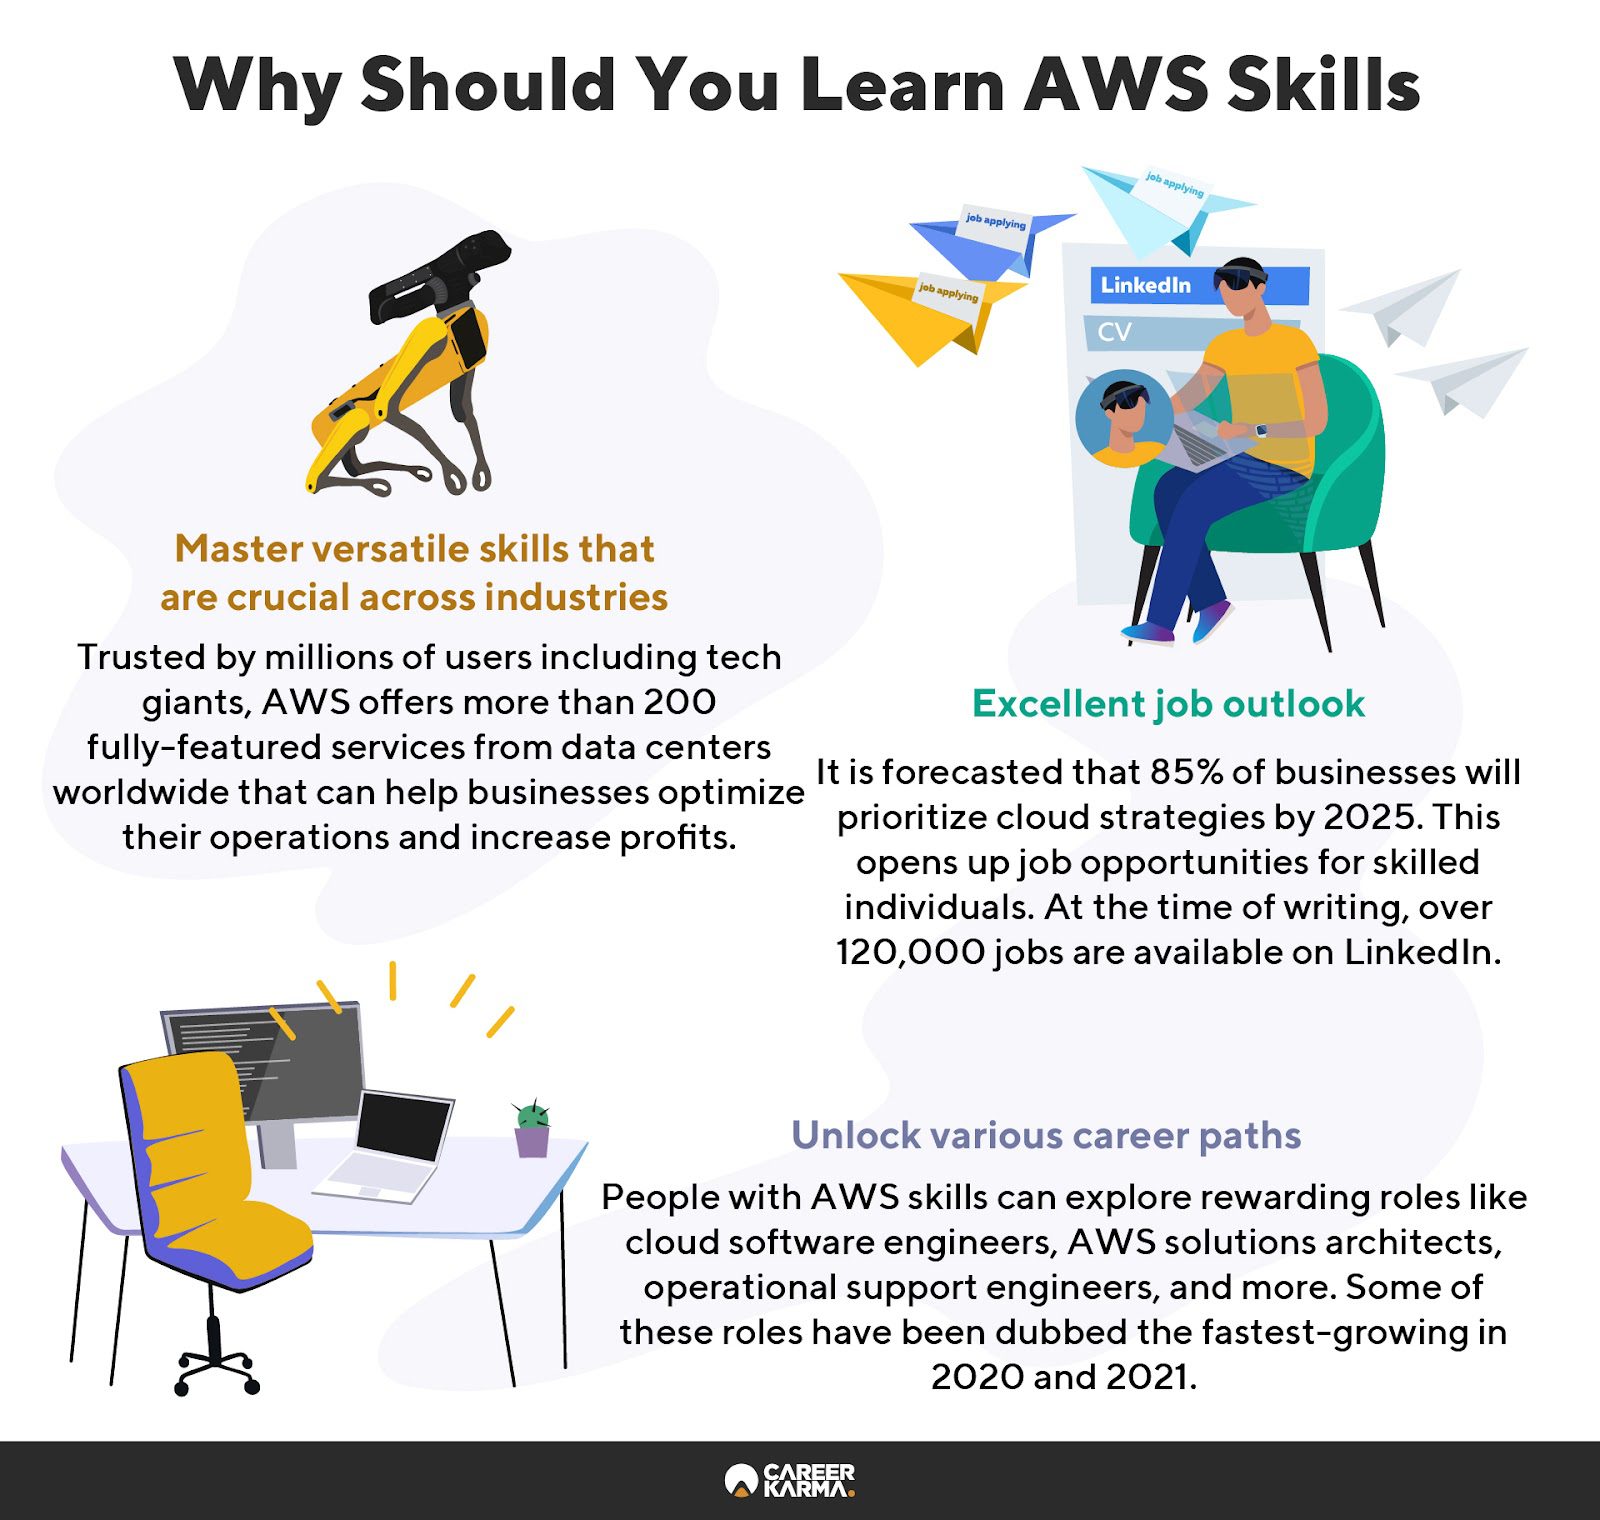 An infographic highlighting the benefits of learning AWS skills